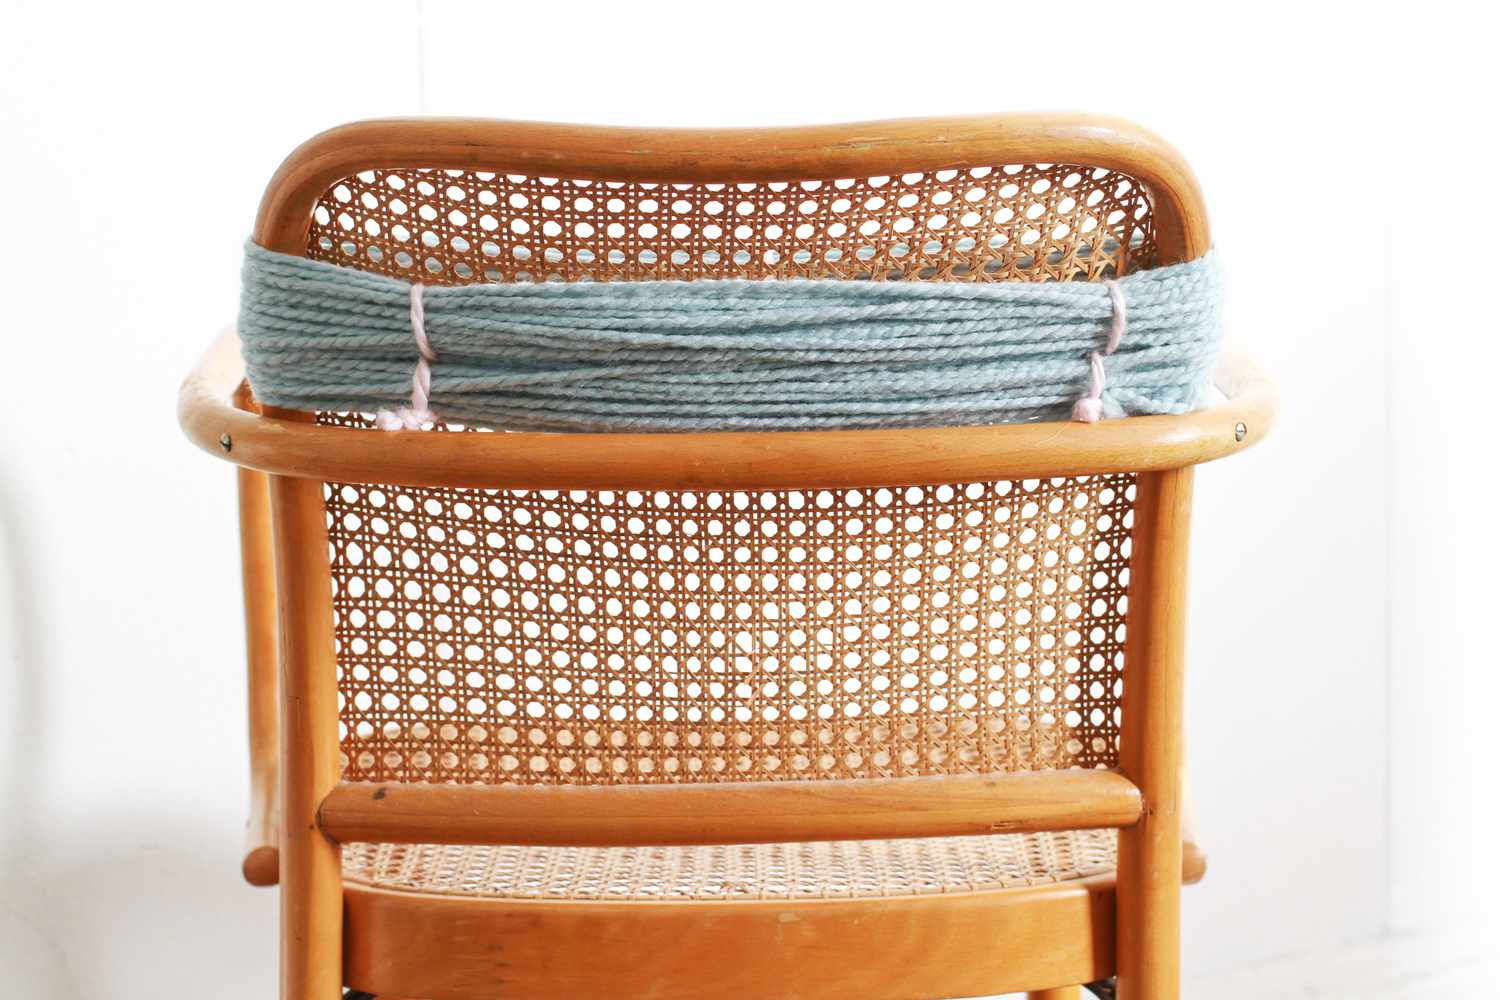 blue yarn wrapped around back of chair tied with white yarn pieces